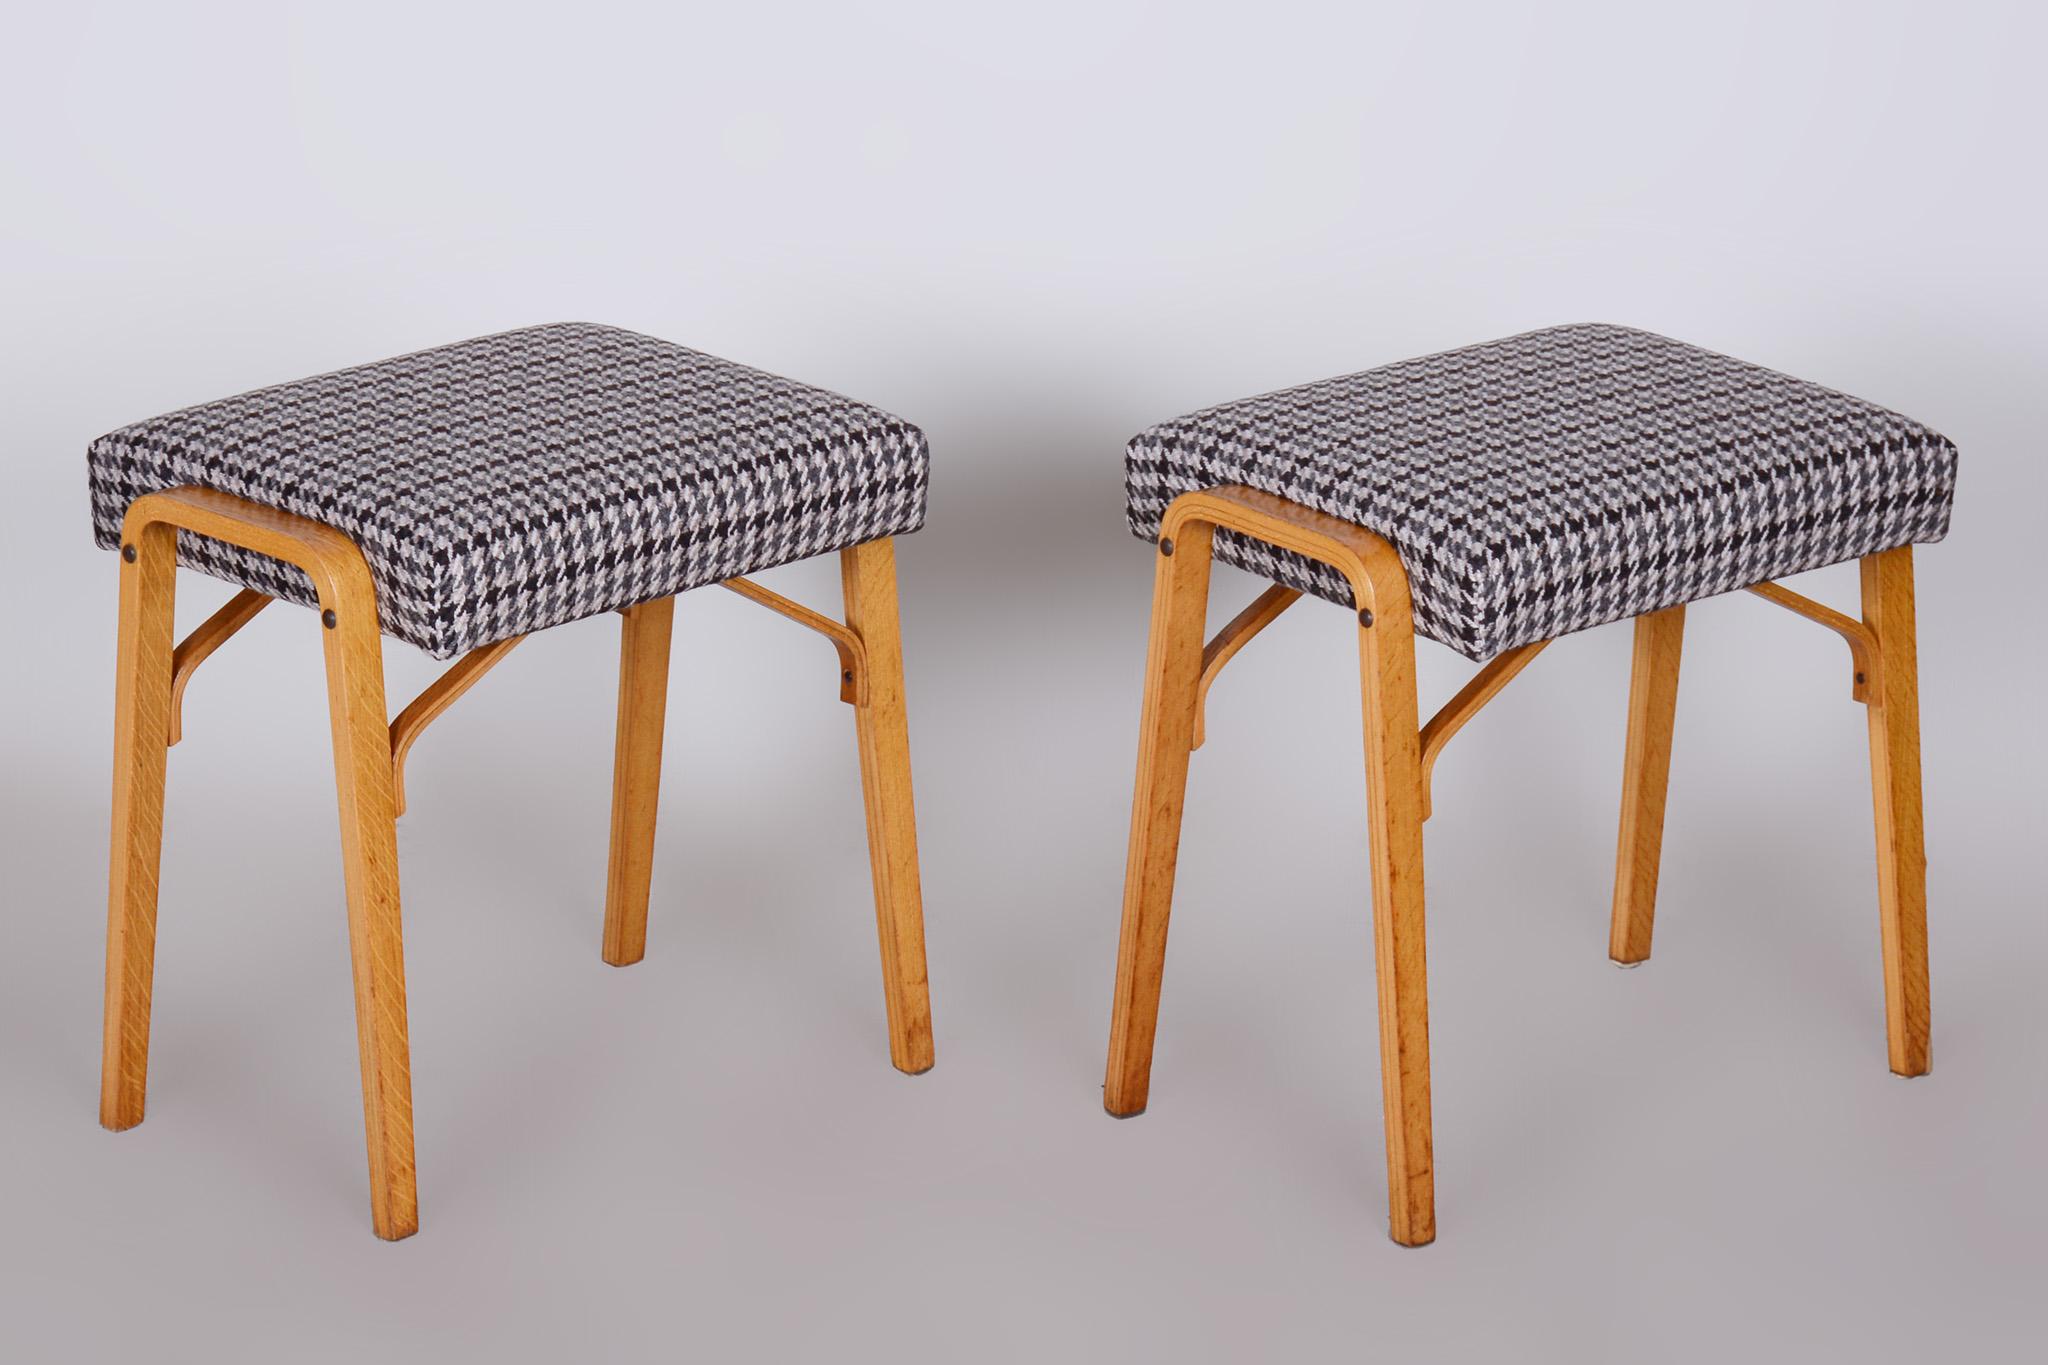 Pair of Midcentury Beech Stools by Ludvik Volak, Czechia, 1950s In Good Condition For Sale In Horomerice, CZ